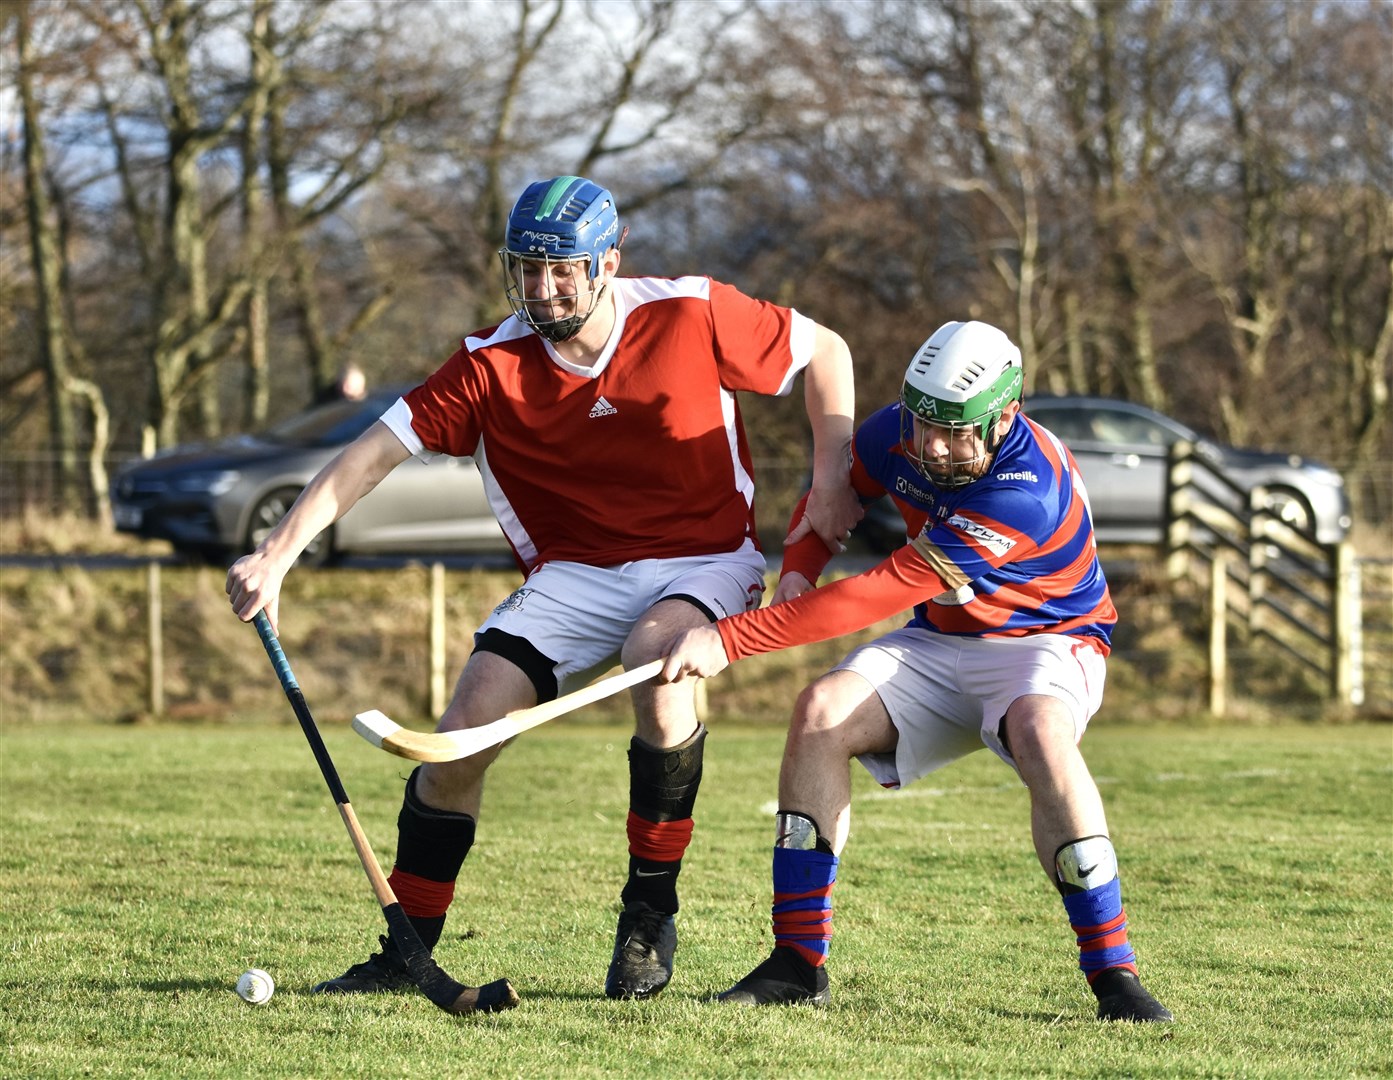 Shinty's player of the year Robert Mabon played for the seniors team.